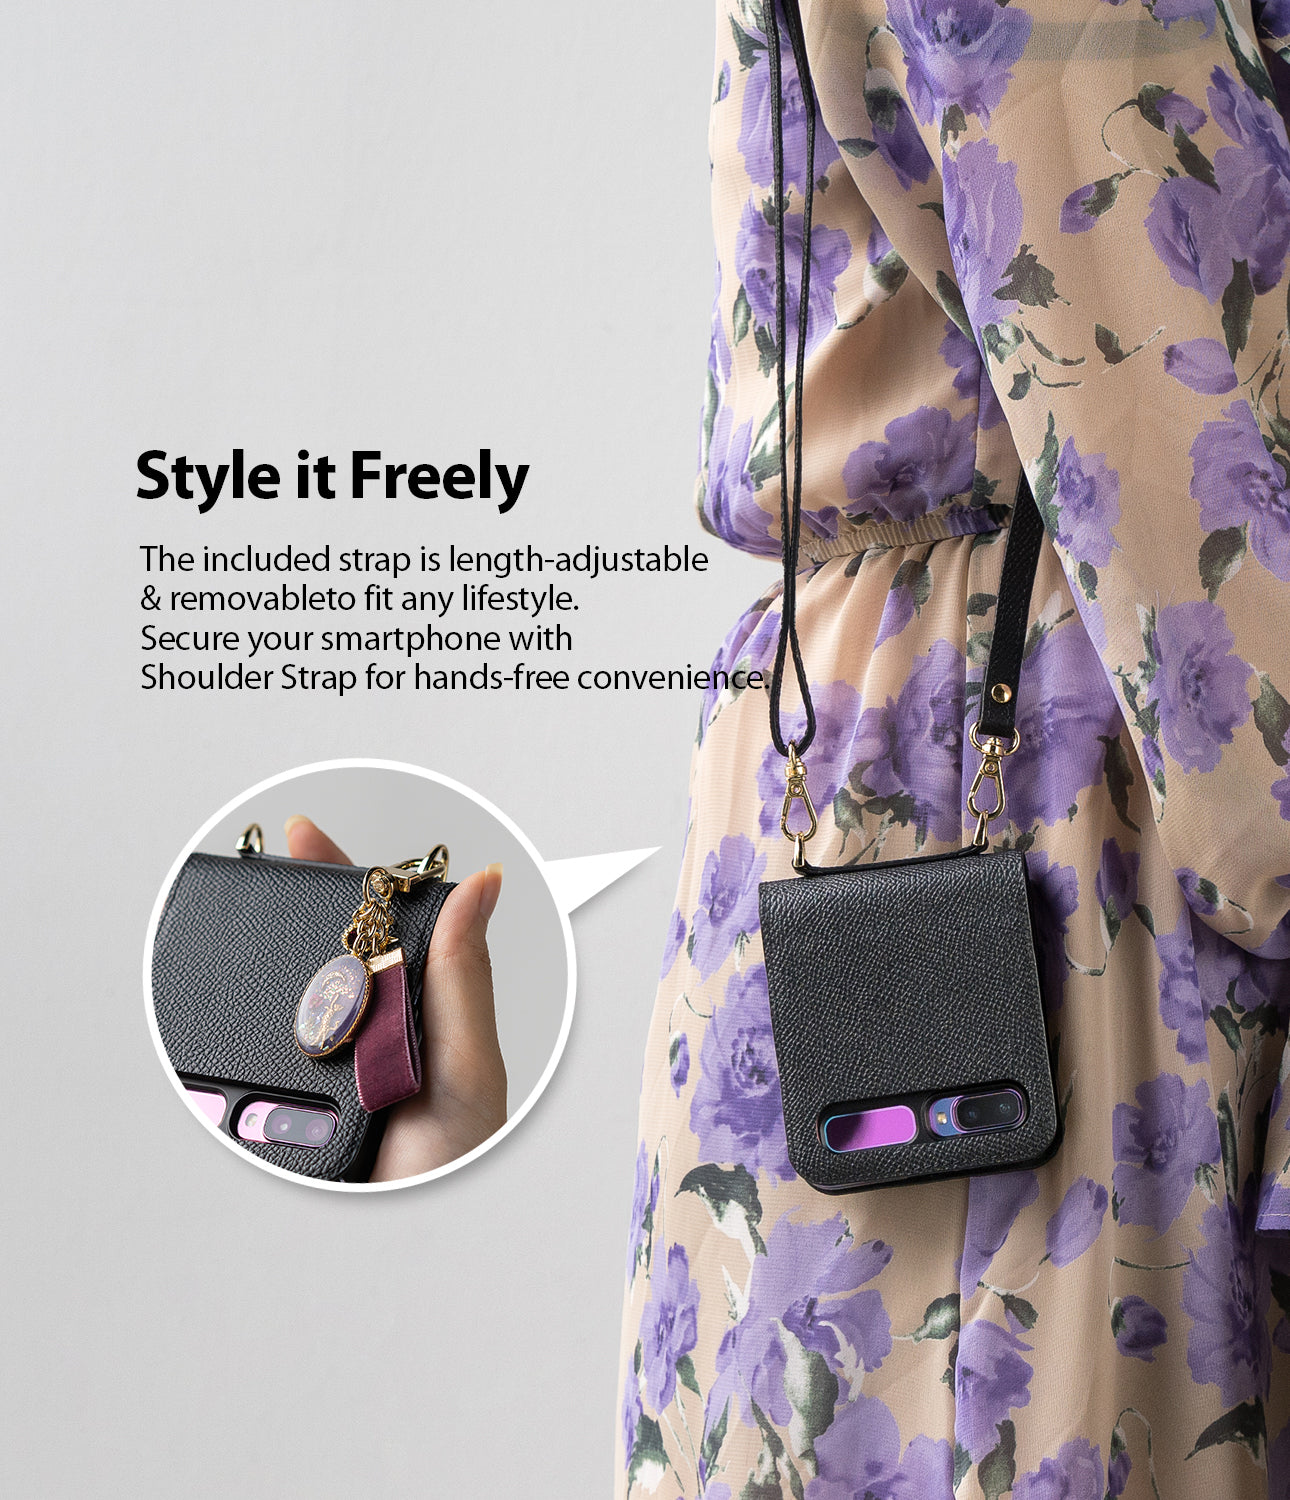 the included strap is lengh-adjustable and removable to fit any lifestyle. Secure your smartphone with shoulder strap for hands-free convenience